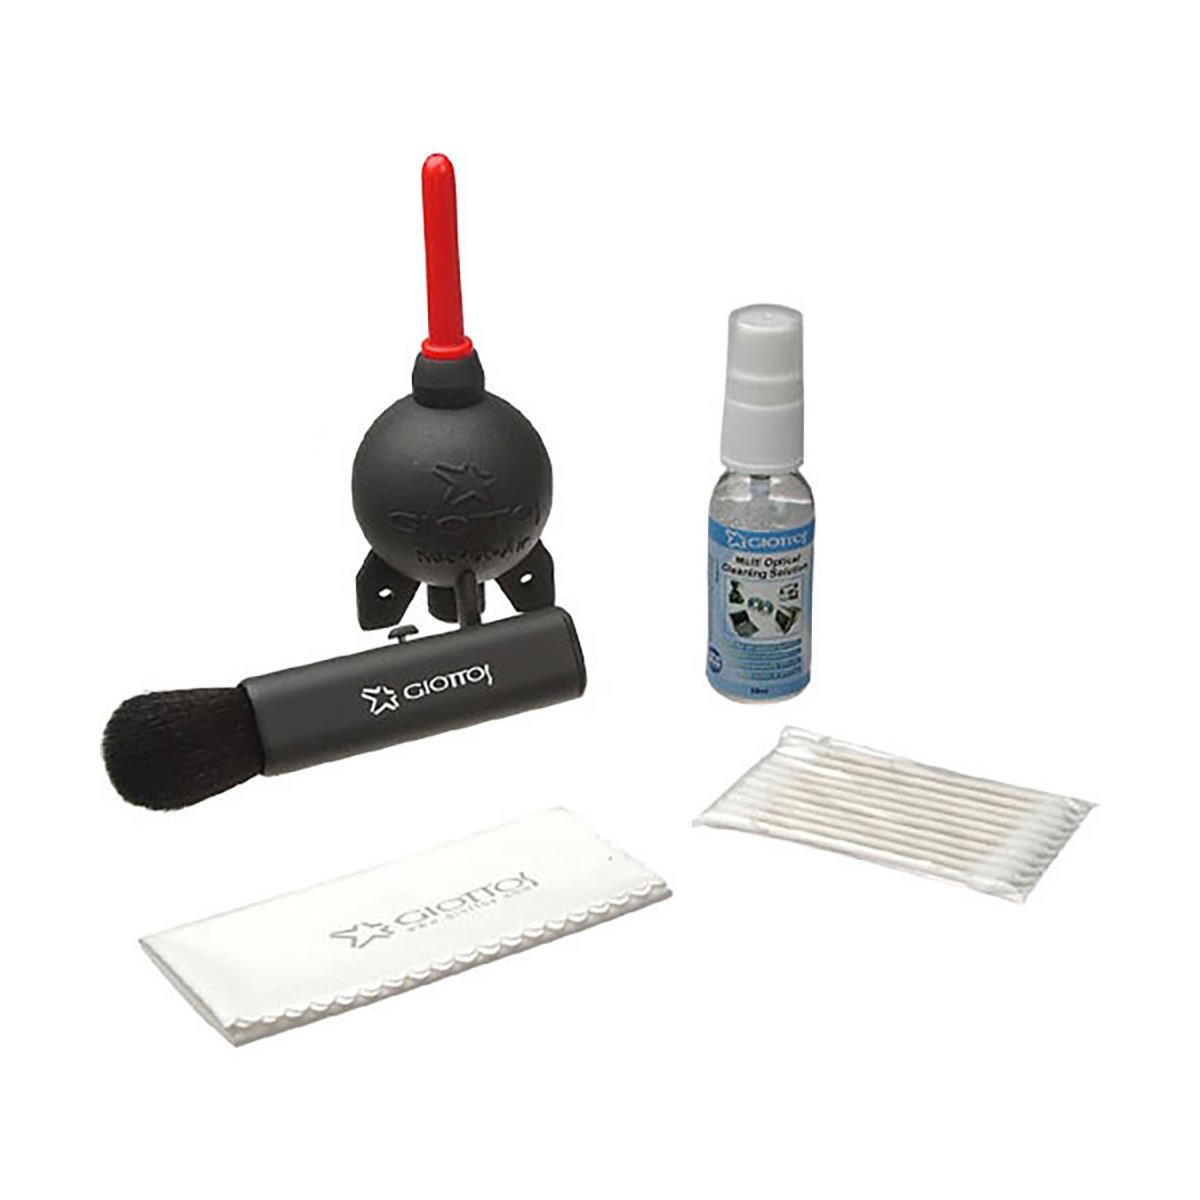 Giottos CL1001 Cleaning System Kit